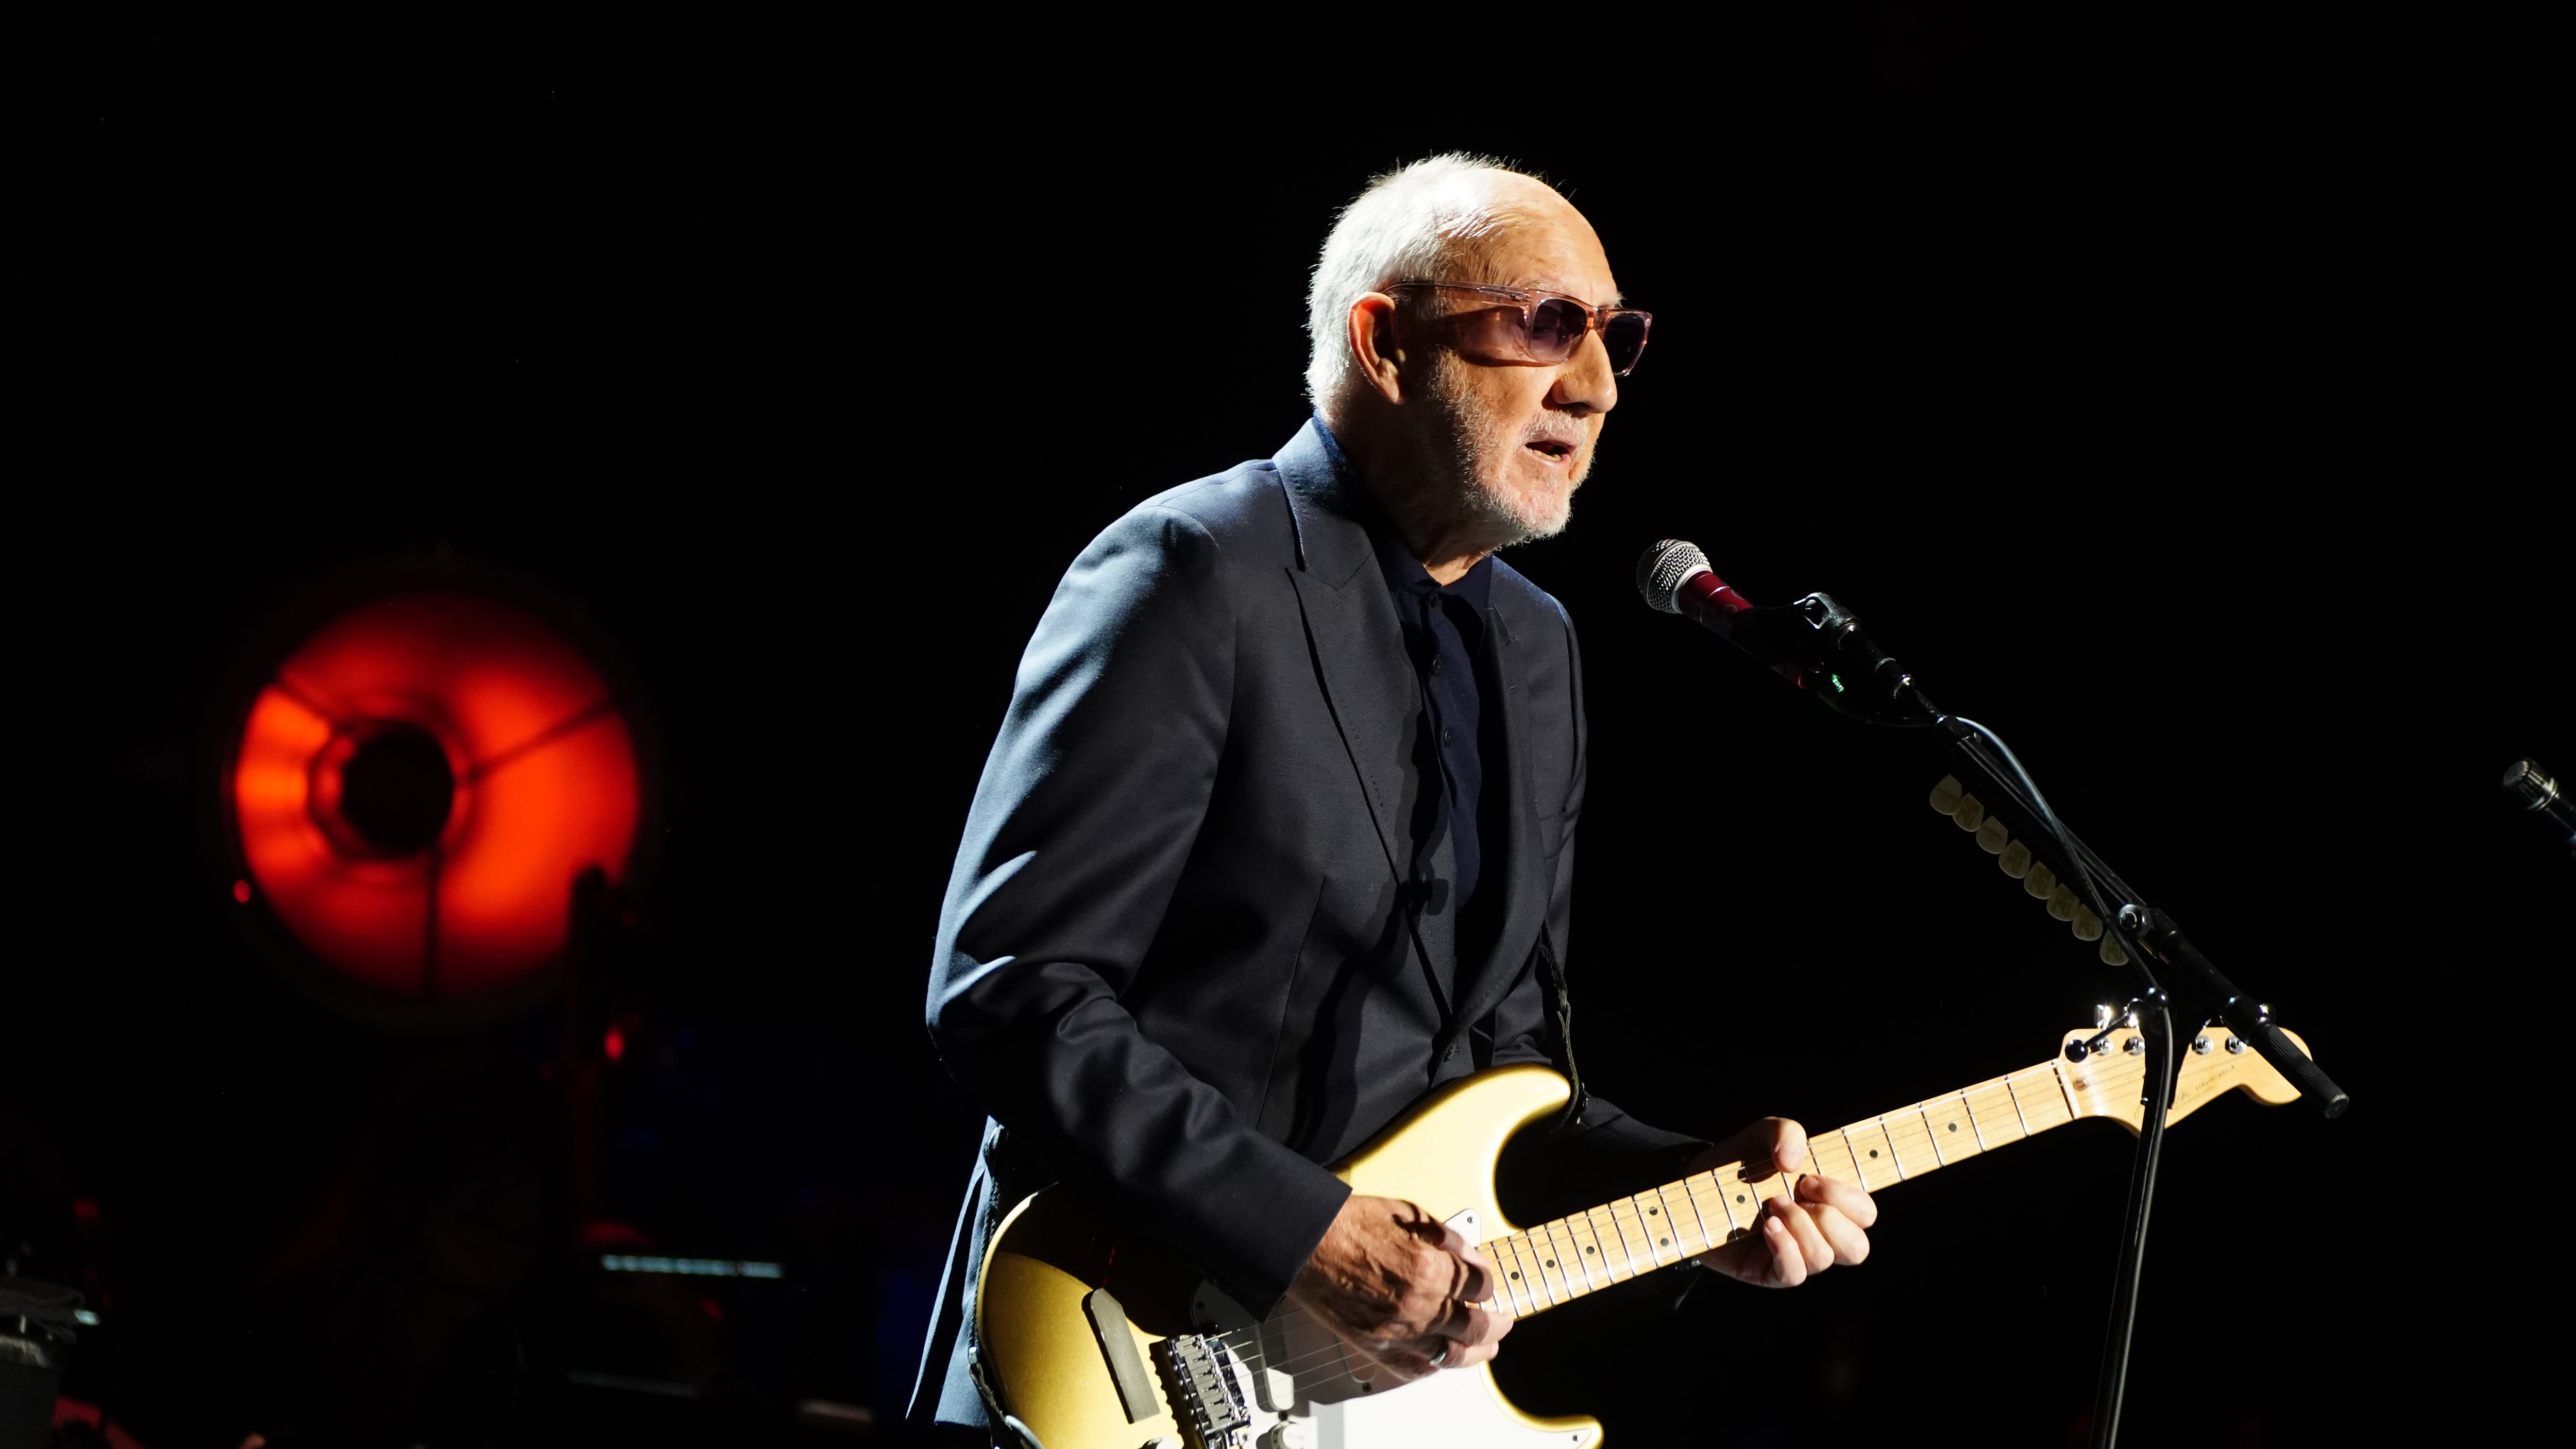 Pete Townshend was ‘blown away’ by the band